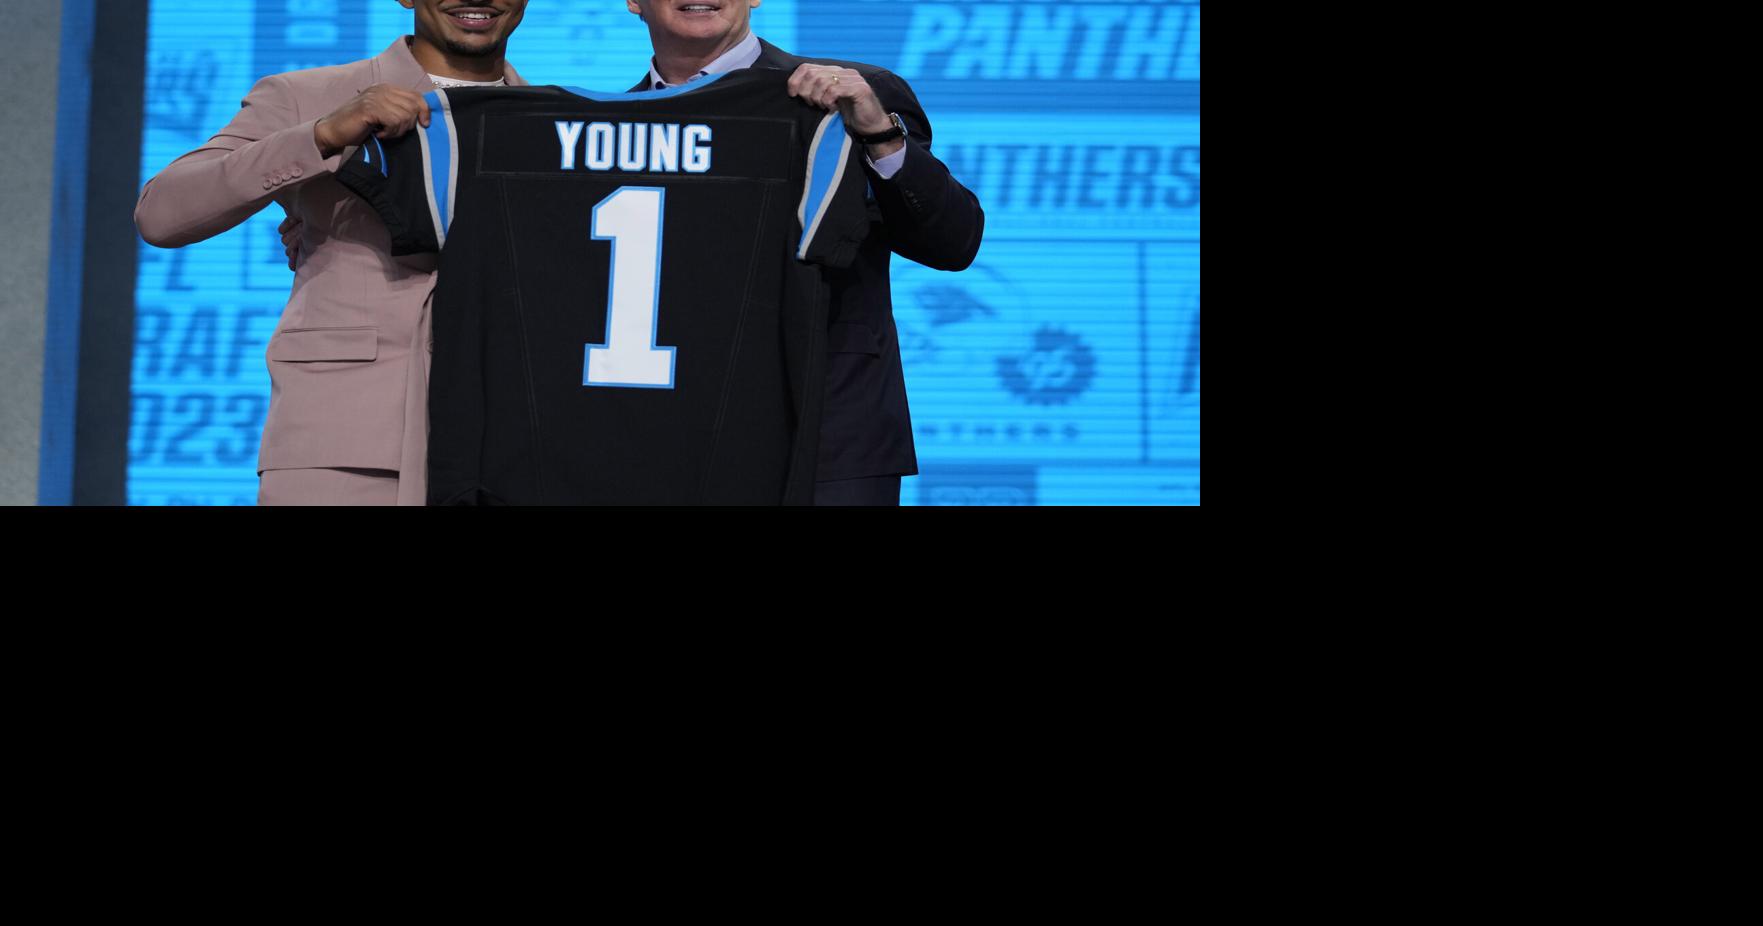 Panthers take Bryce Young at No. 1 overall in NFL draft